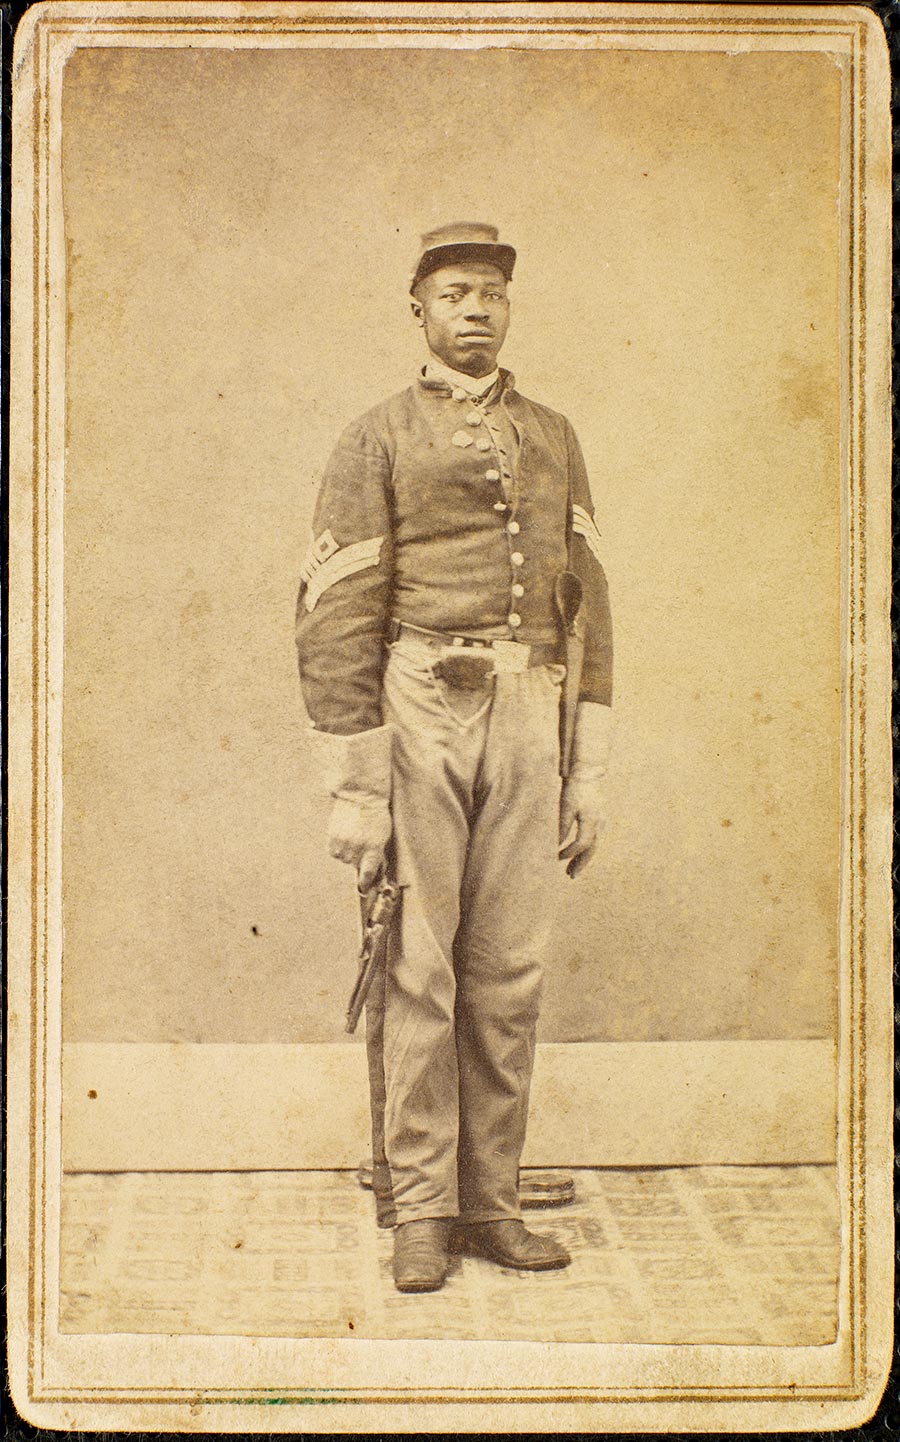 An unidentified African American soldier from the 22nd United States Colored Infantry